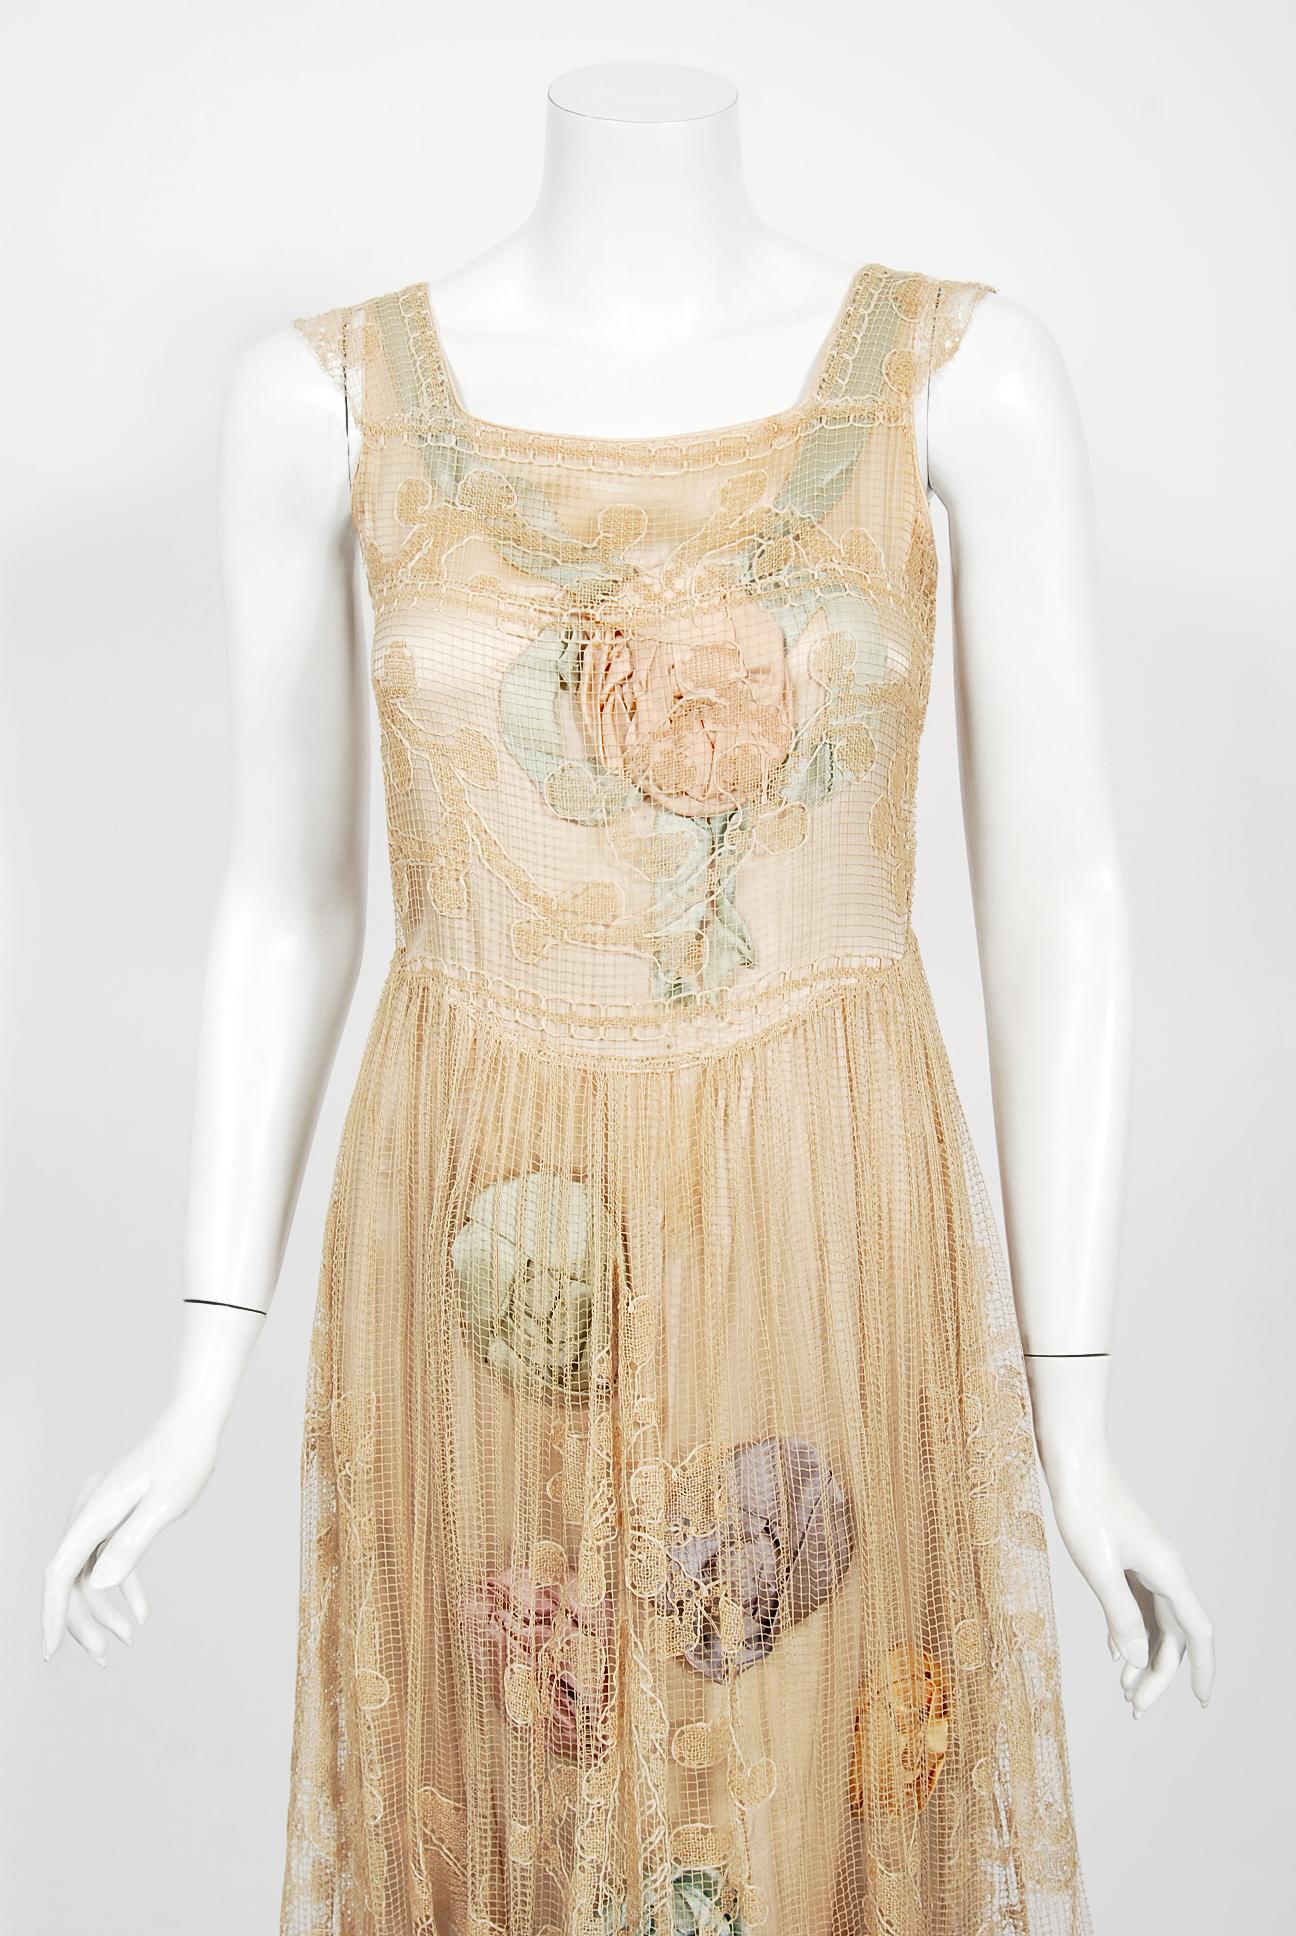 A breathtaking museum quality bridal dance dress dating back to the mid-1920's. Two layers are cleverly designed to complement each other; a fine filet-lace outer layer with a foliate design over an ecru silk-crepe slip layer embroidered with pastel